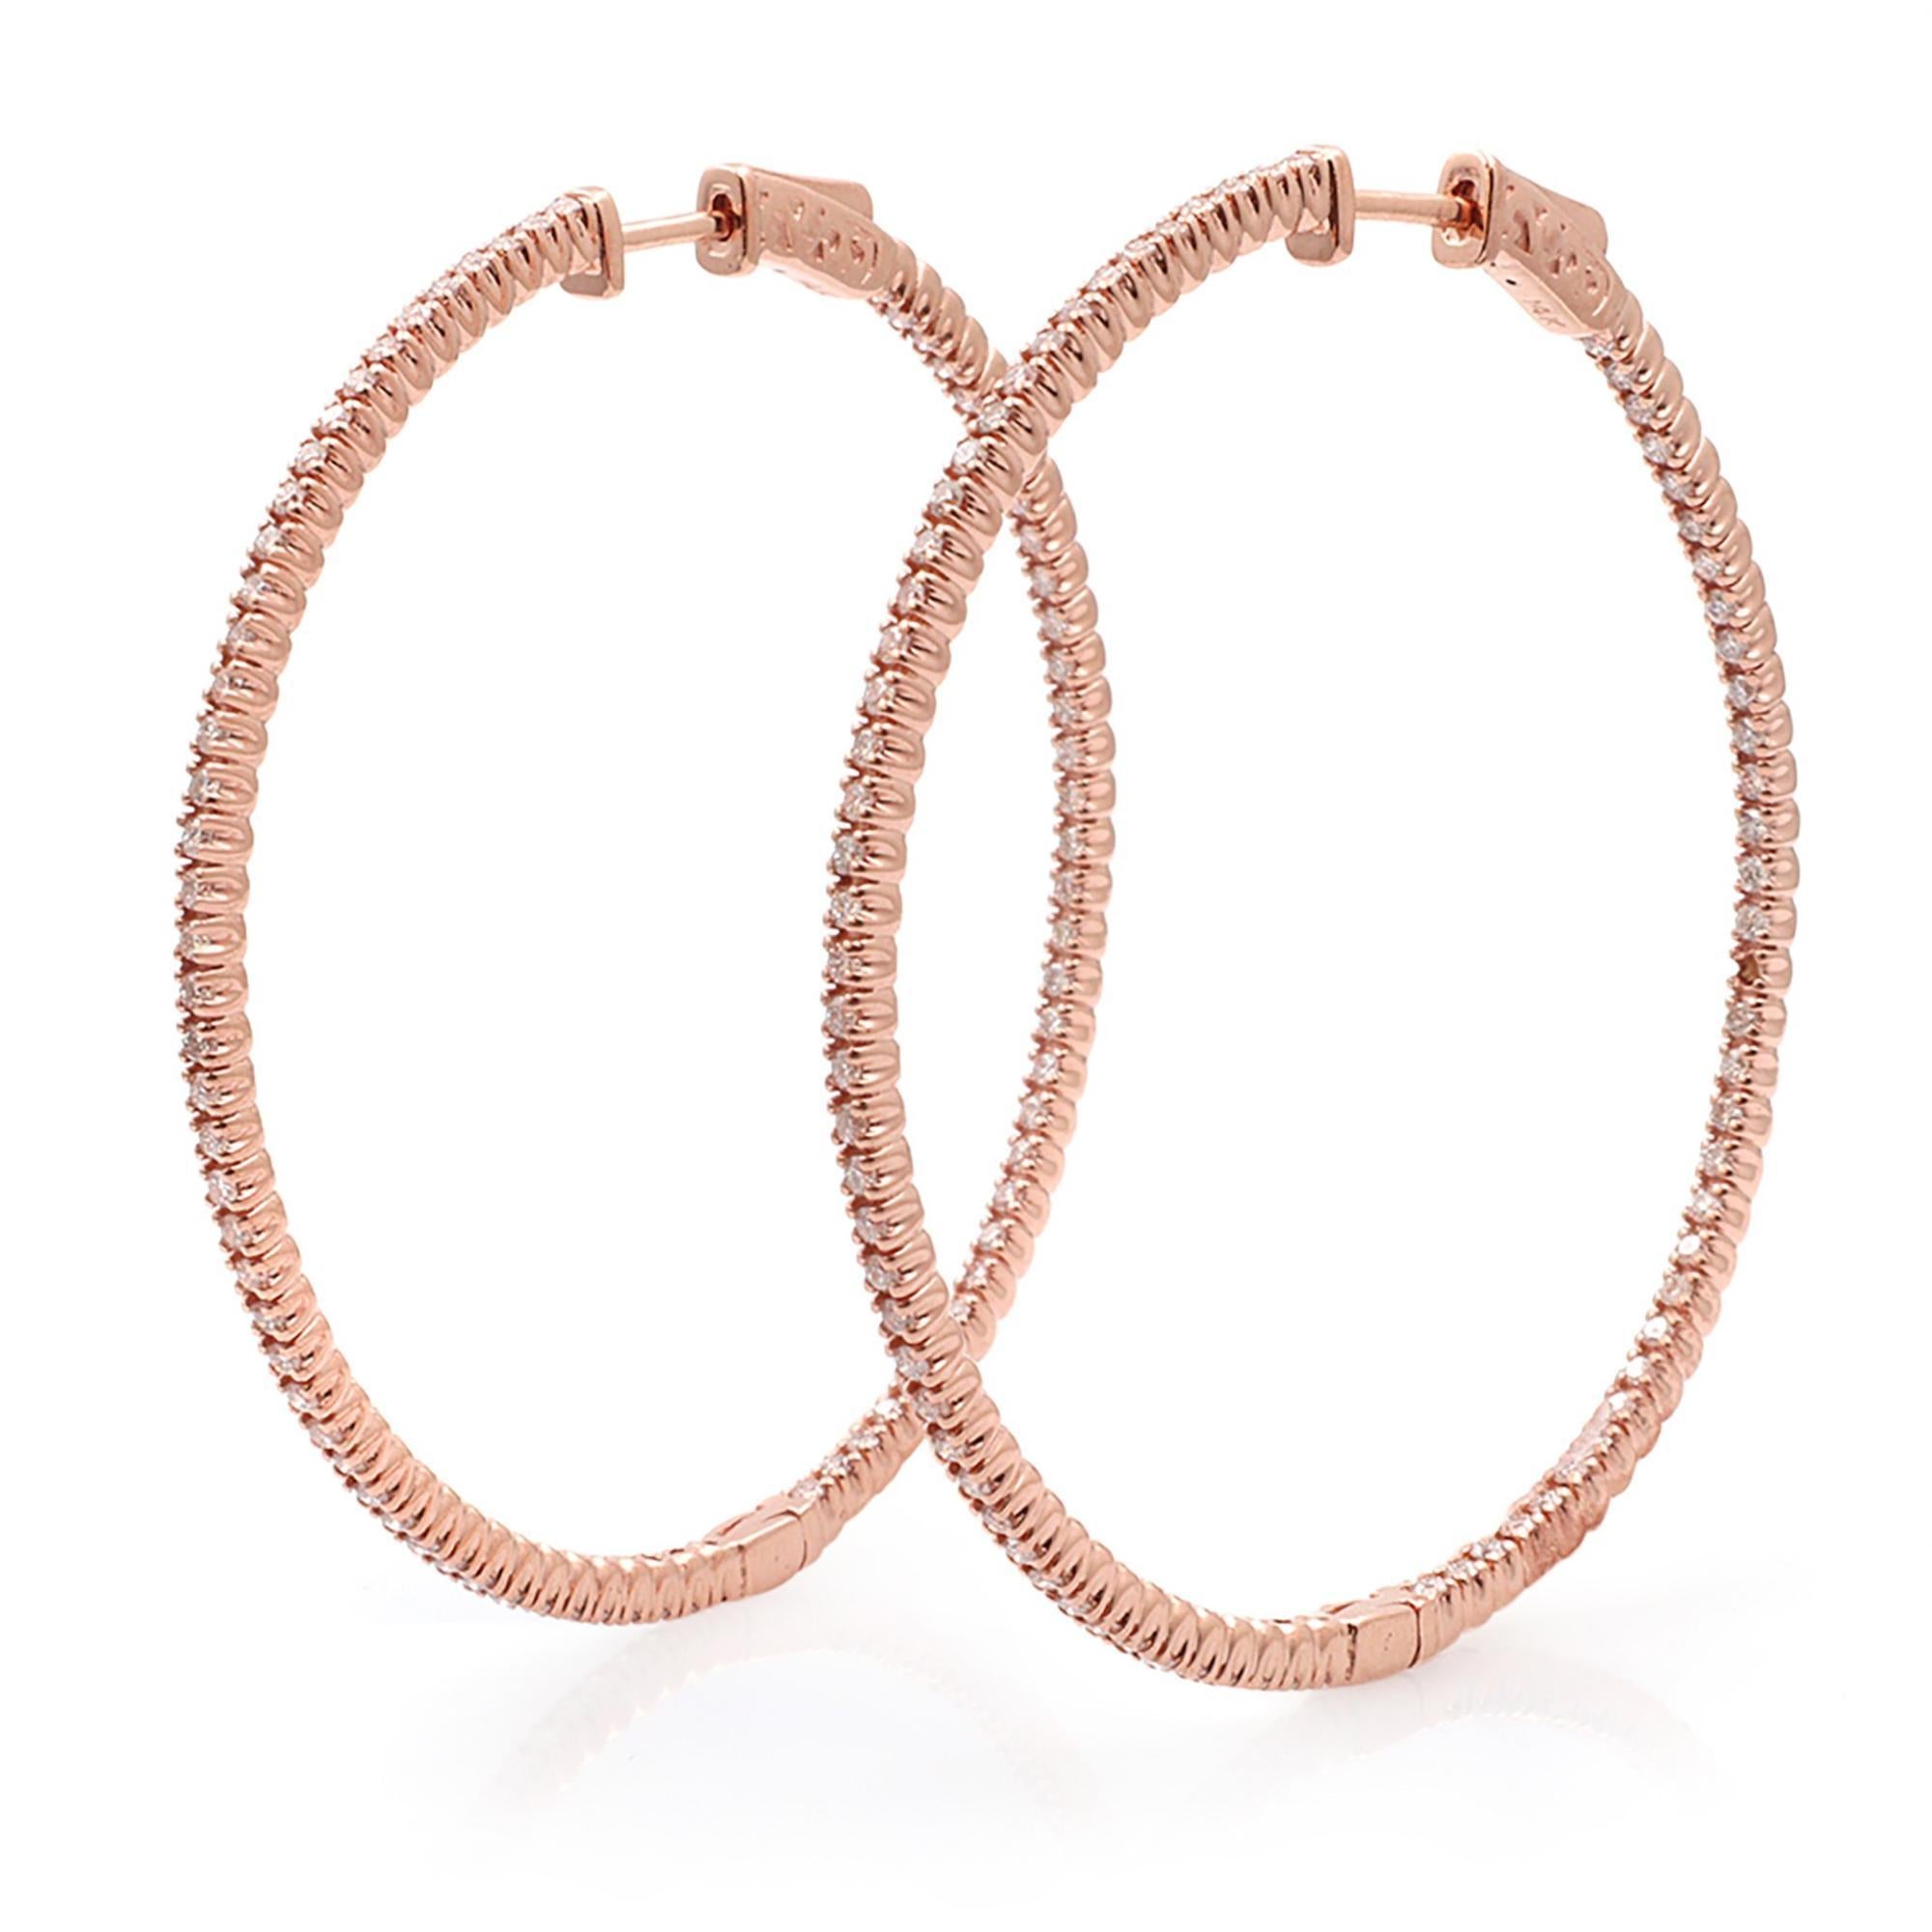 This stylish and elegant 14k rose gold hoop earrings feature prong-set round diamonds in a single line. The diamonds embellish these earrings on the inside and the outside, offering a dazzling look from every angle. Total carat weight 1.65cttw.